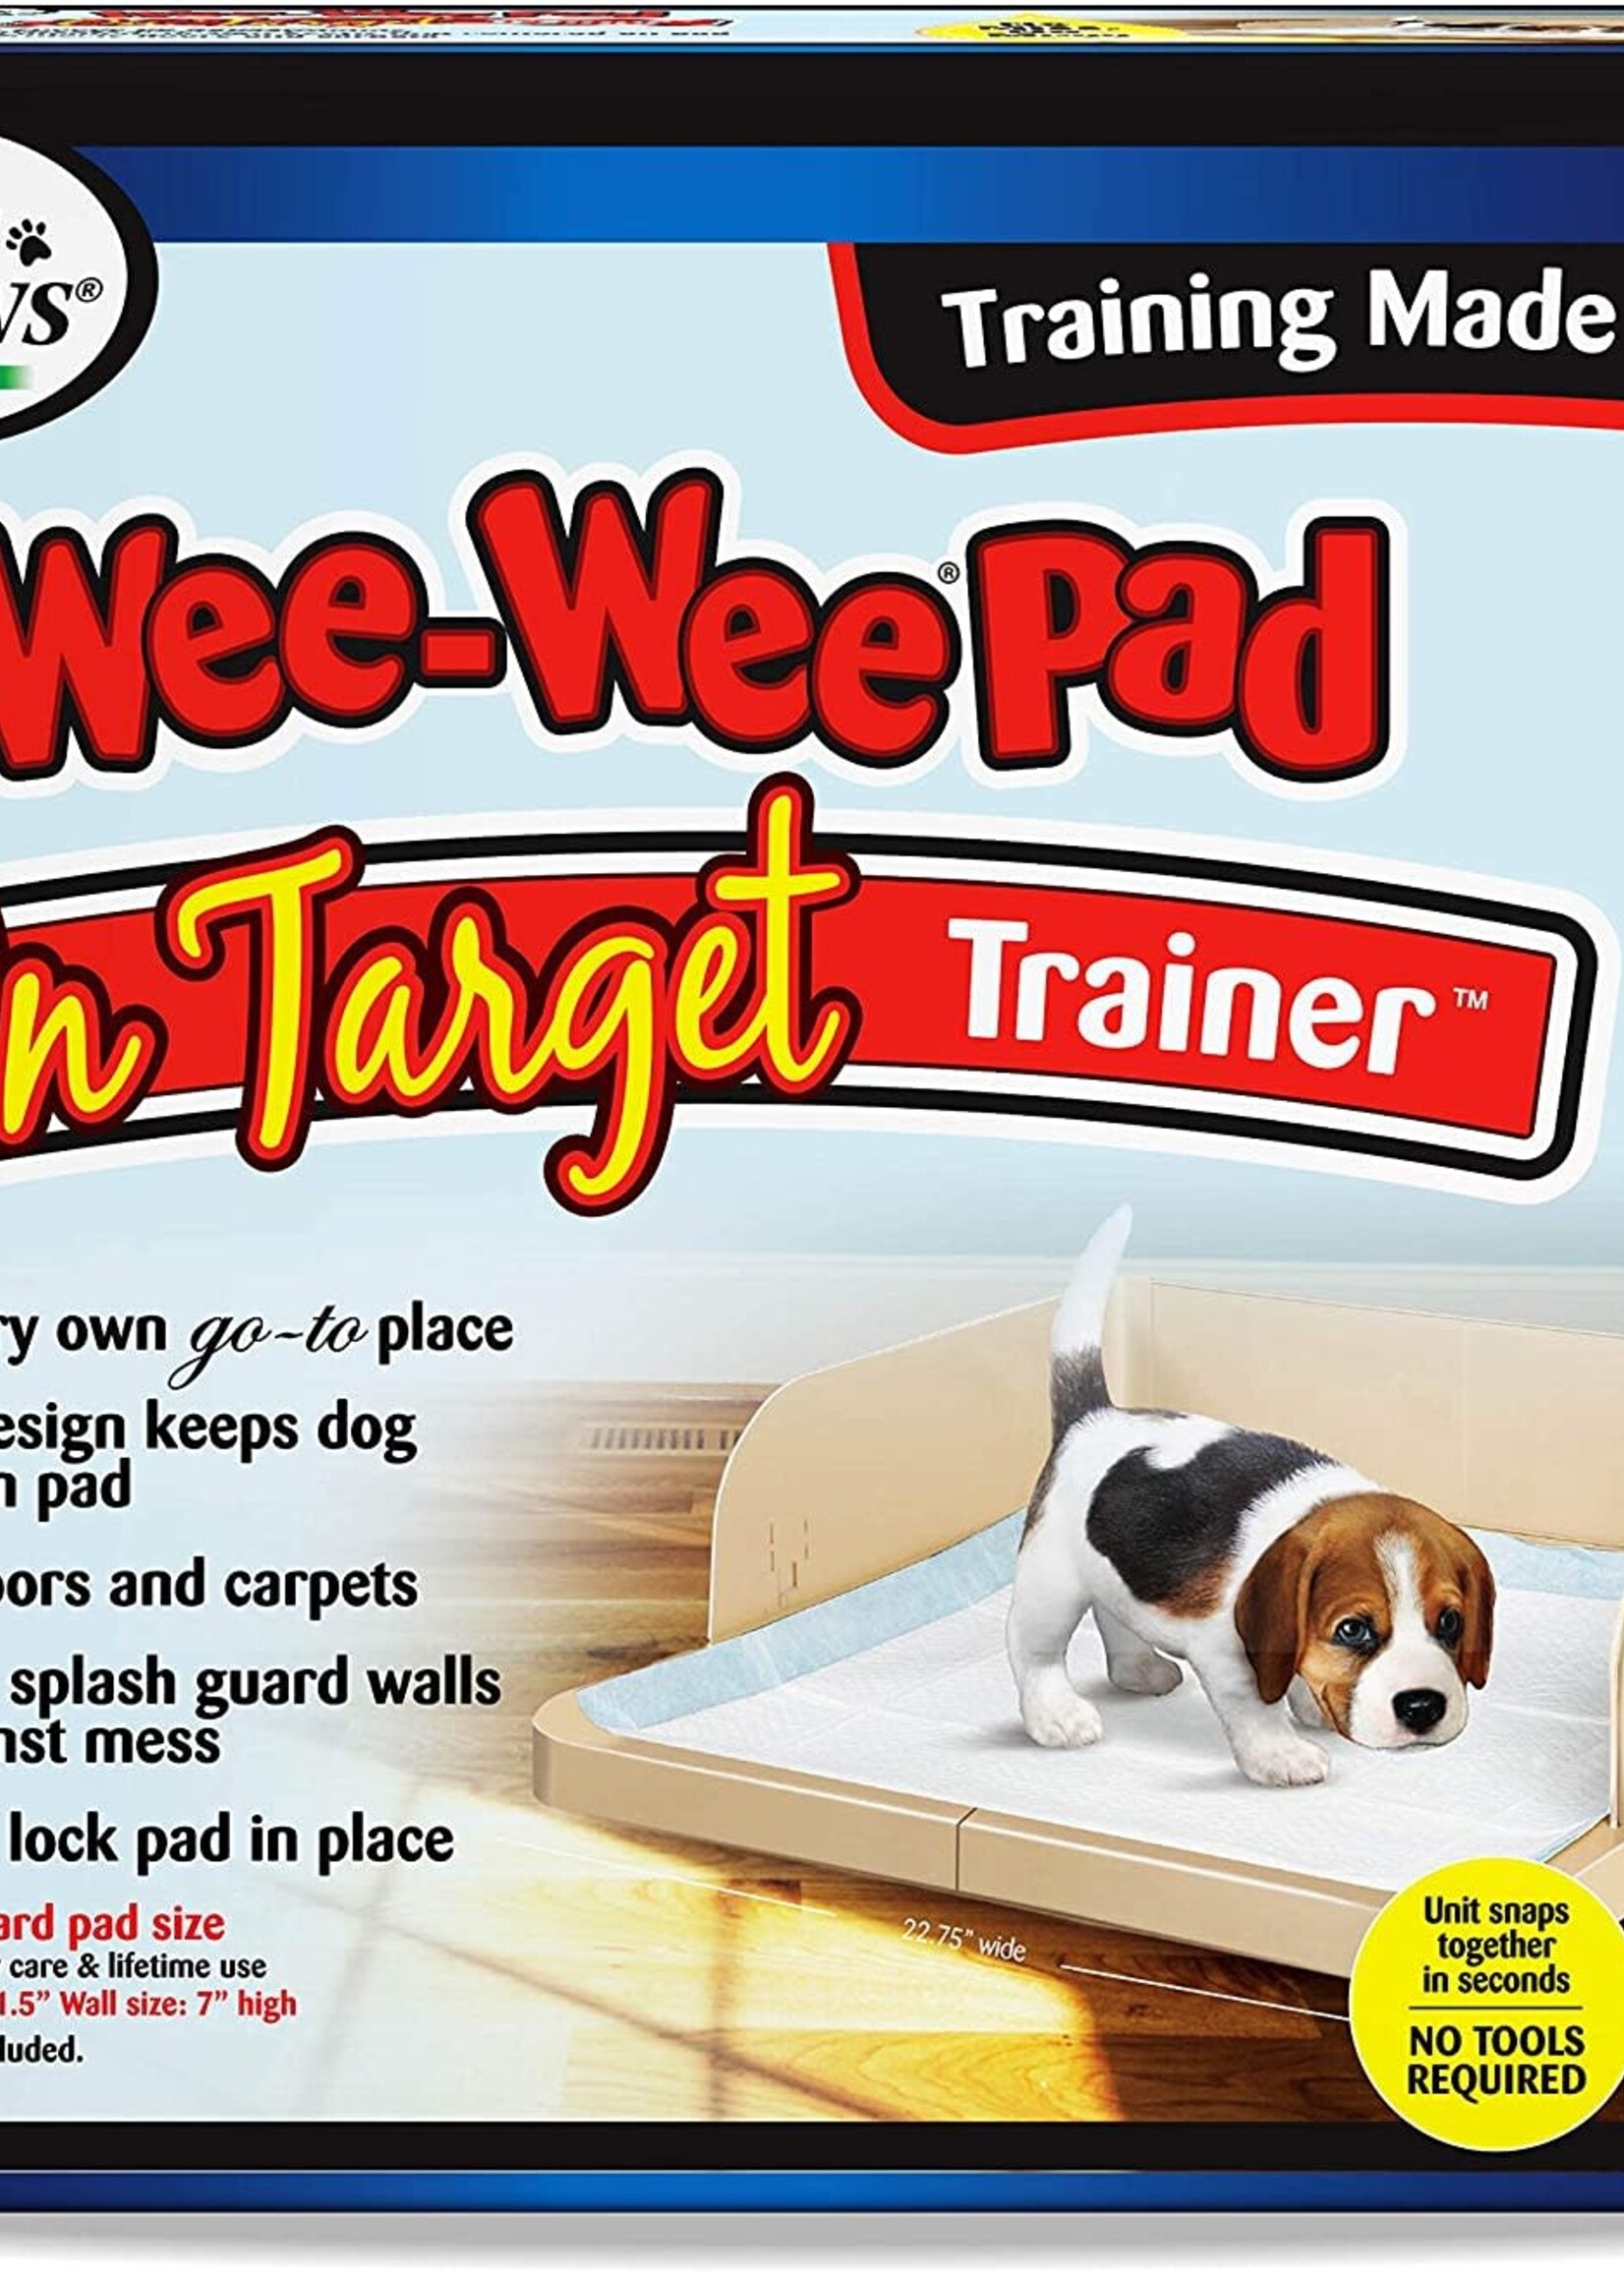 Four Paws Four Paws Wee-Wee Pad On Target Trainer Plastic for Dogs